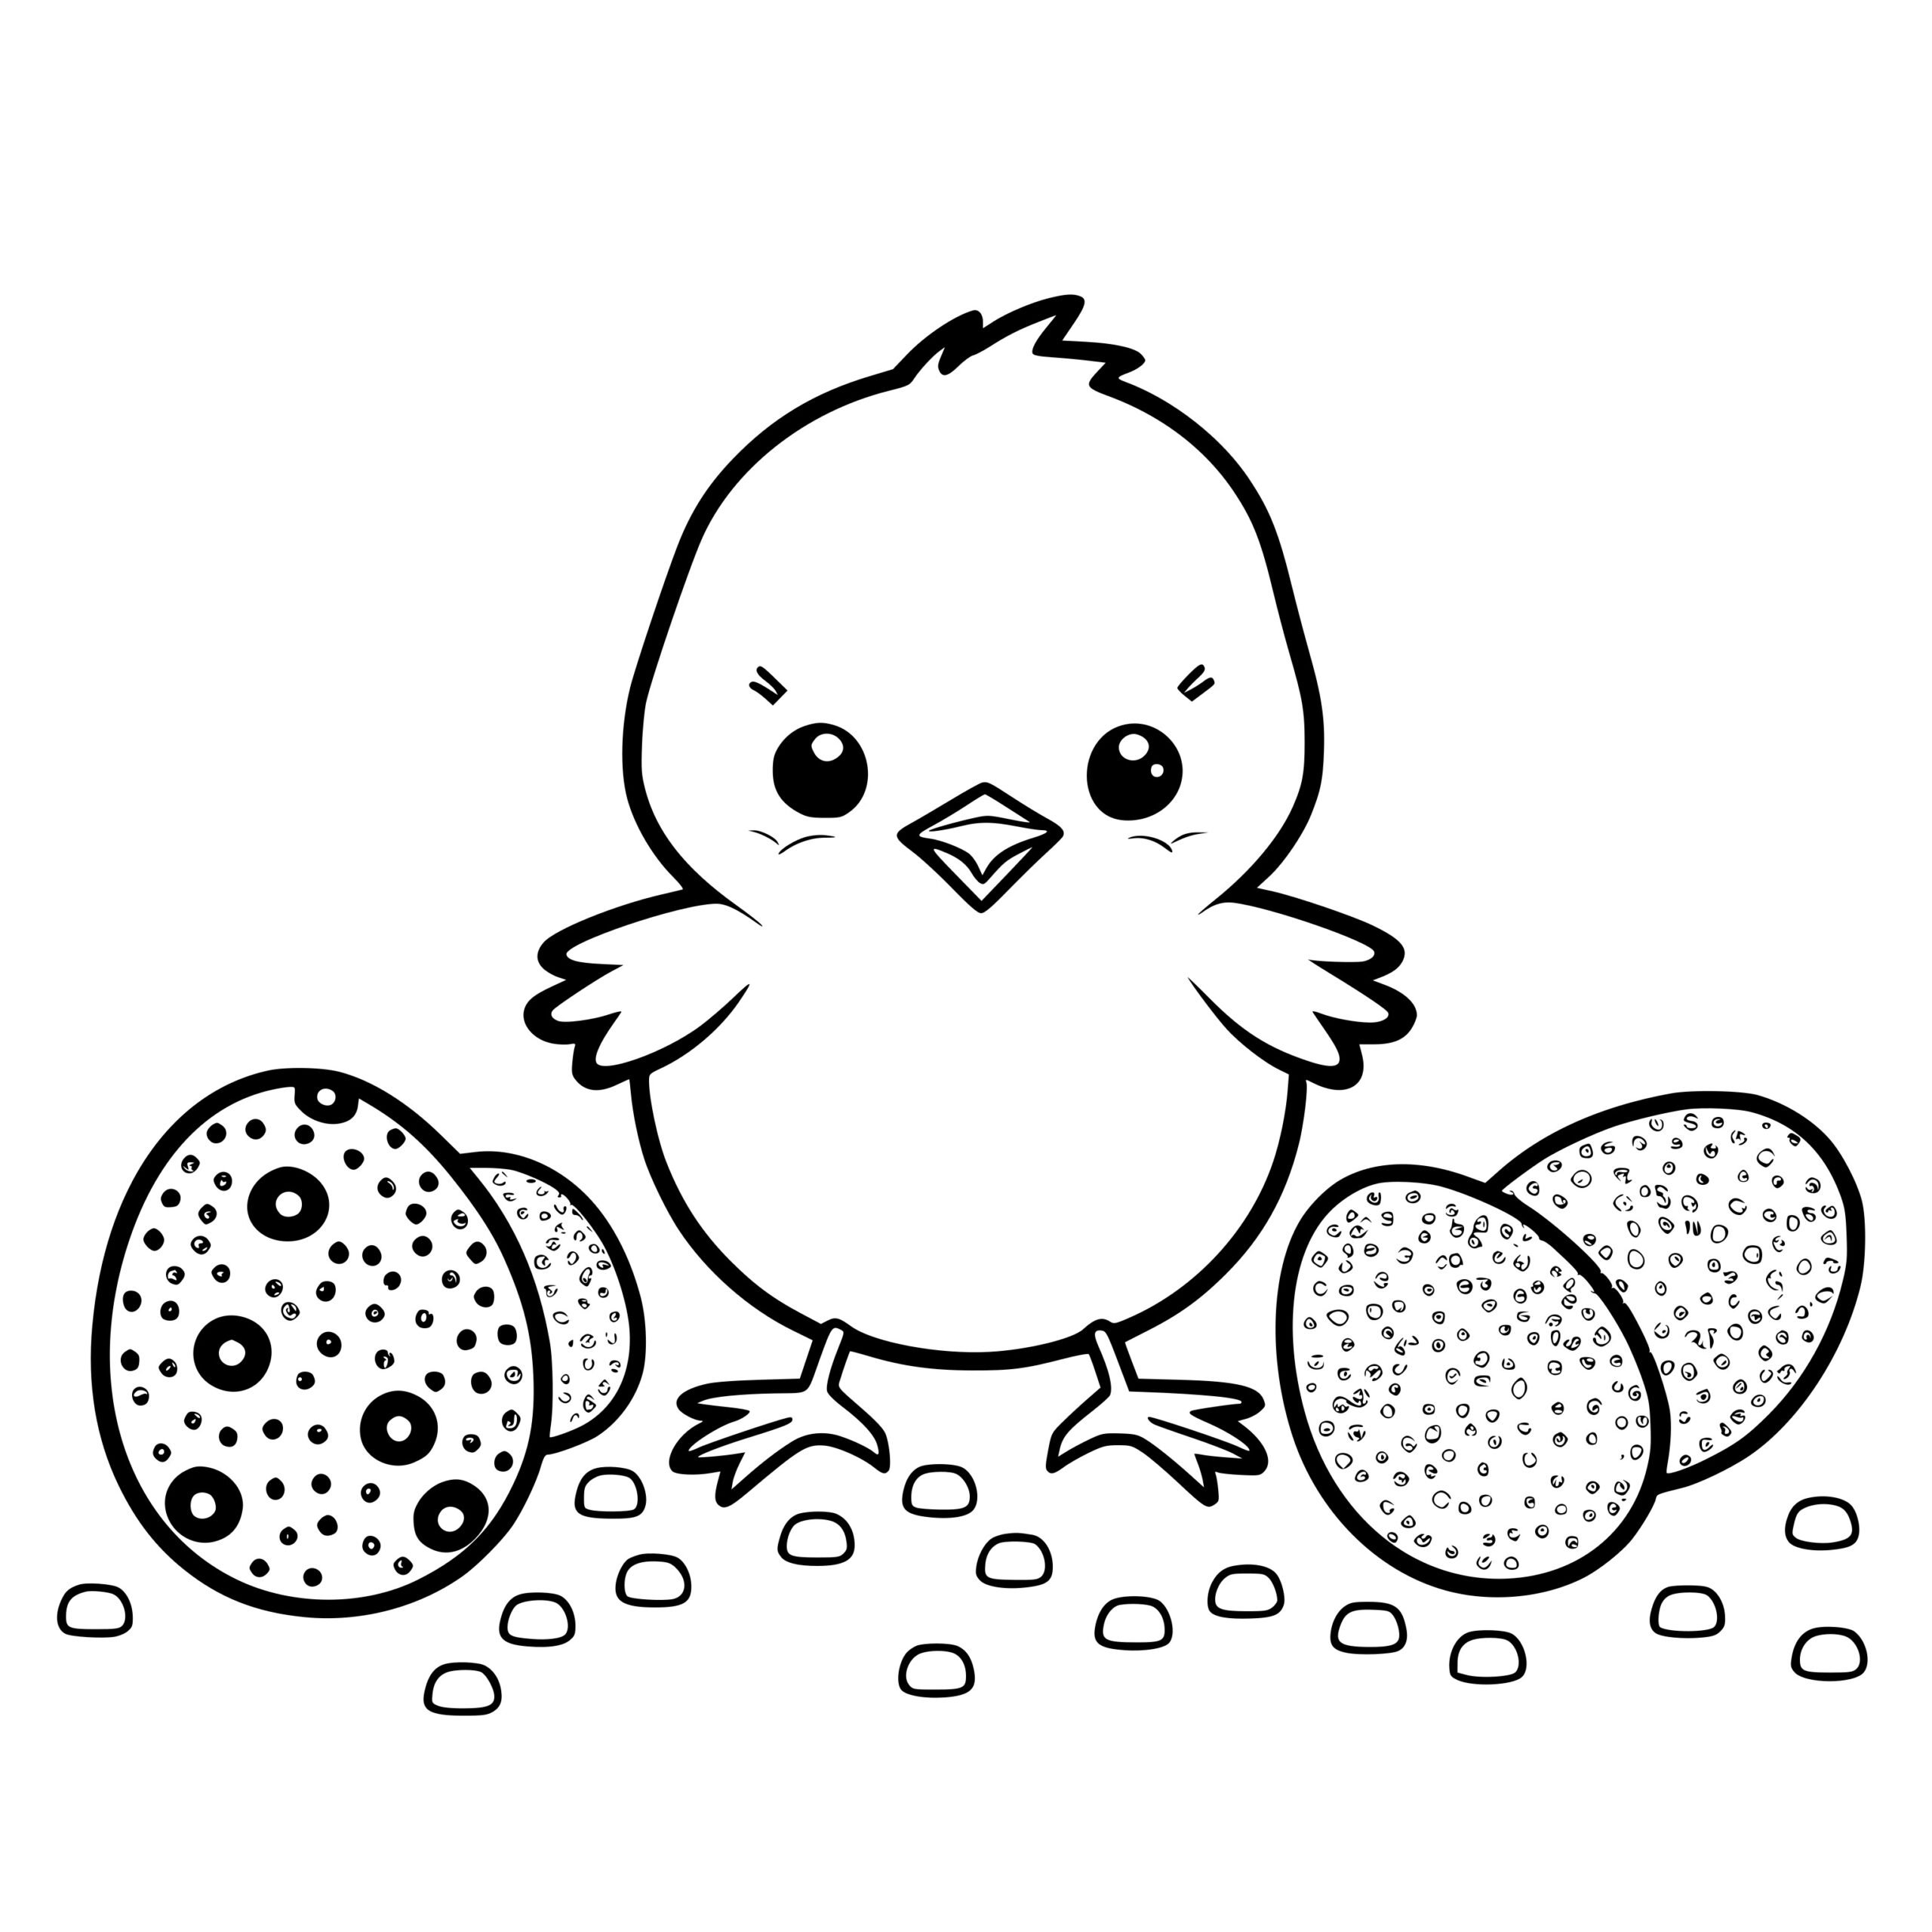 Cute Baby Chick Easter Eggs SVG File for Cricut, Silhouette